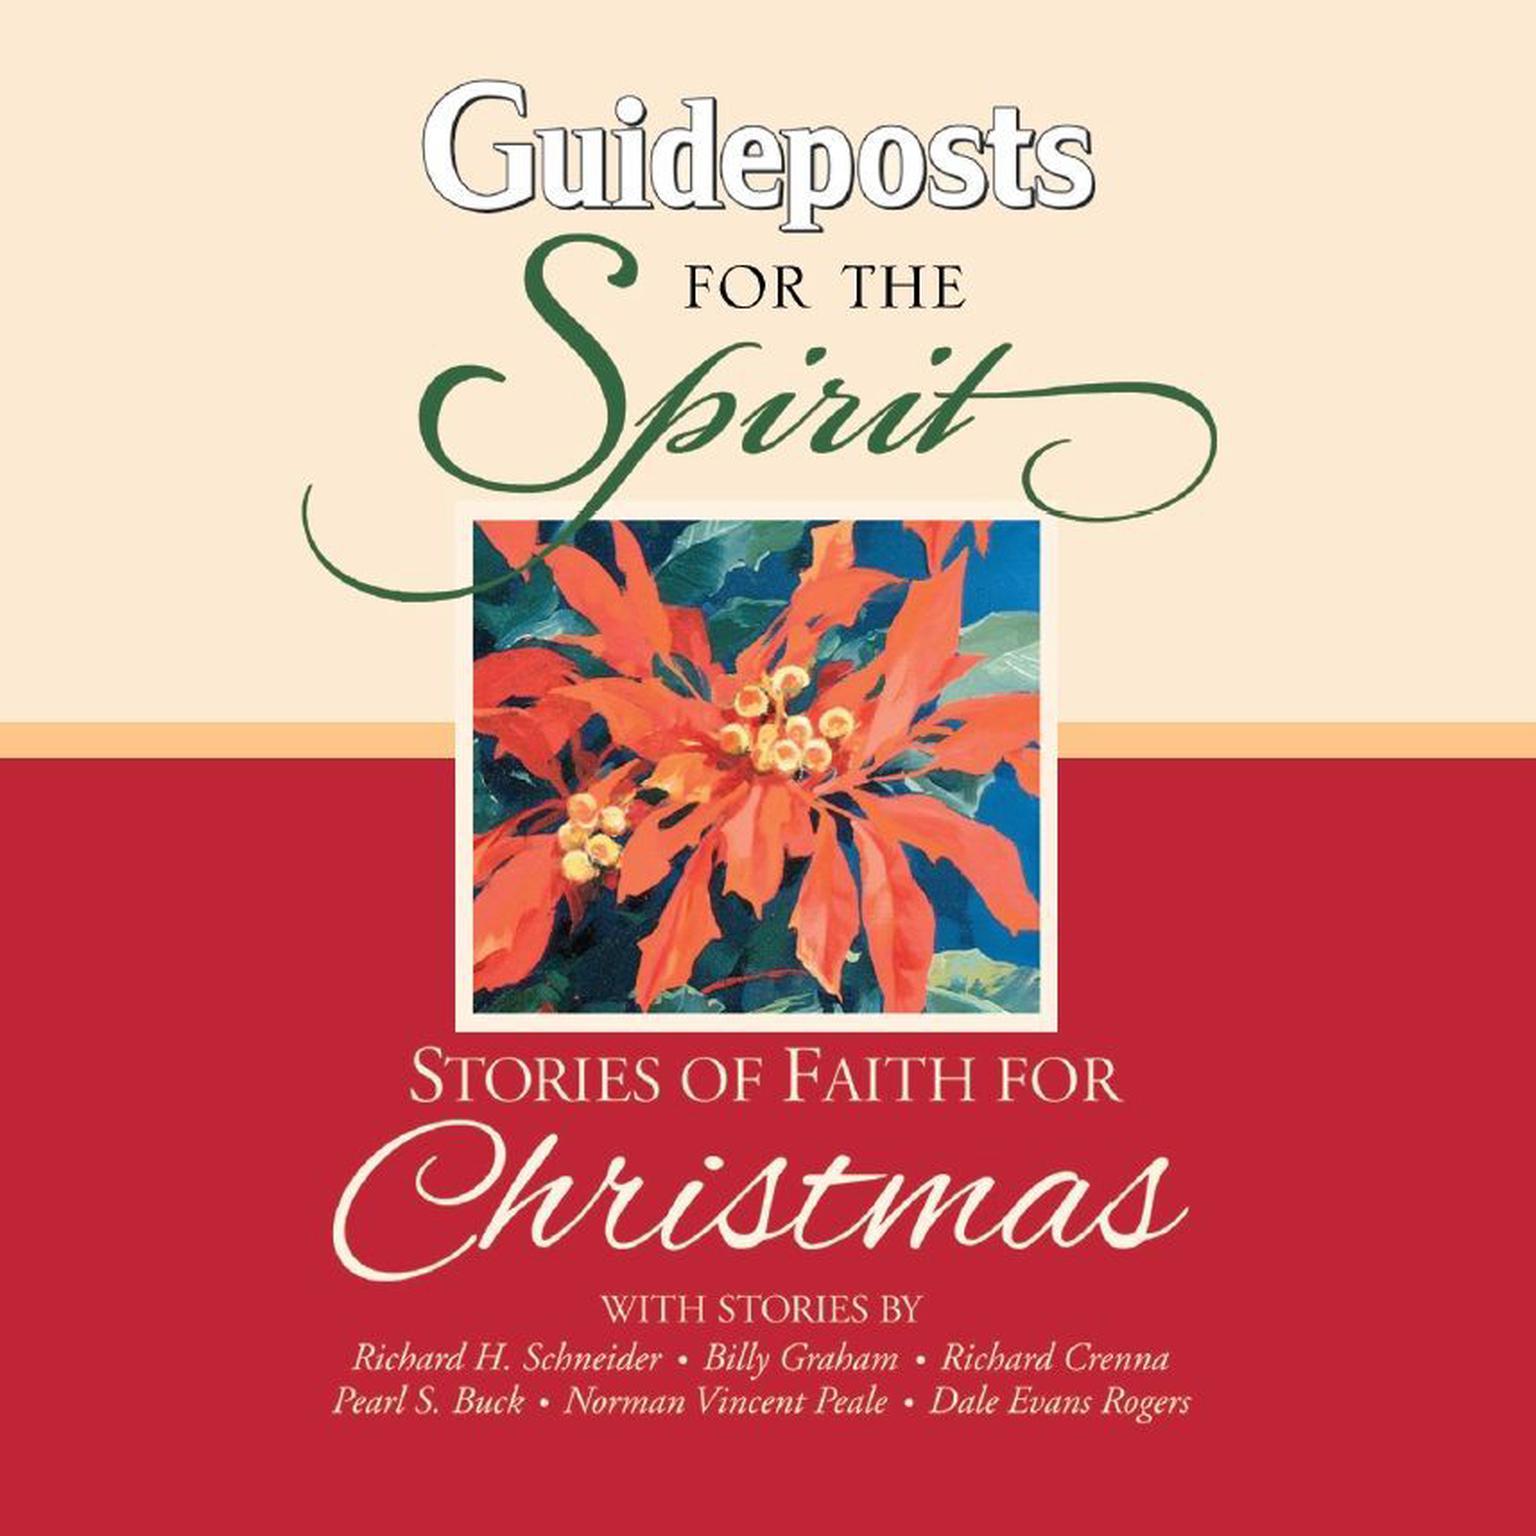 Stories of Faith For Christmas: Guideposts for the Spirit Audiobook, by various authors